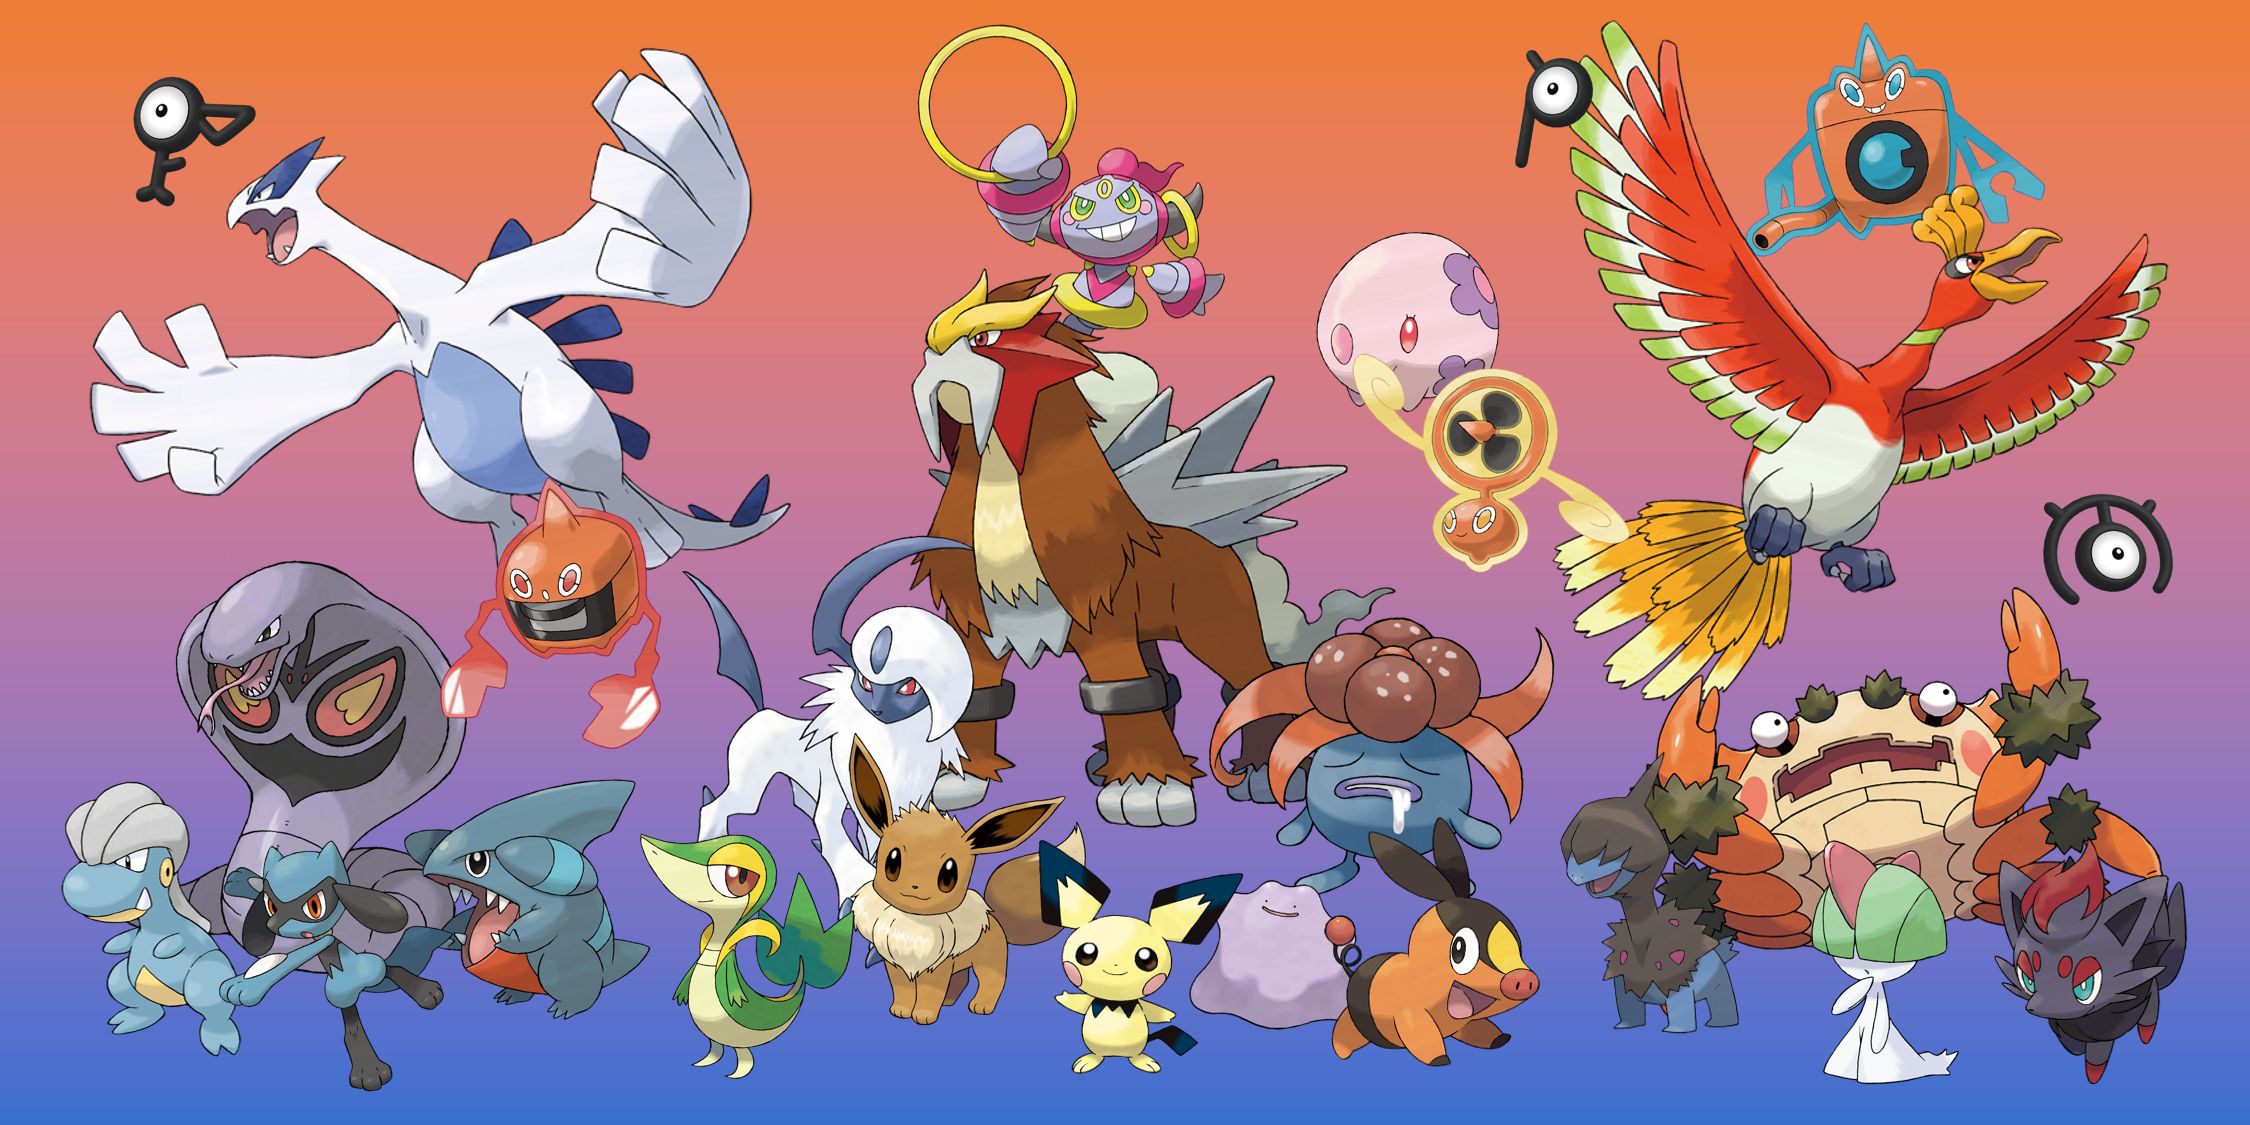 Pokemon with five-letter names: Azelph, Lugia, Entei, Tepig, Sniby, Clawf, and more.